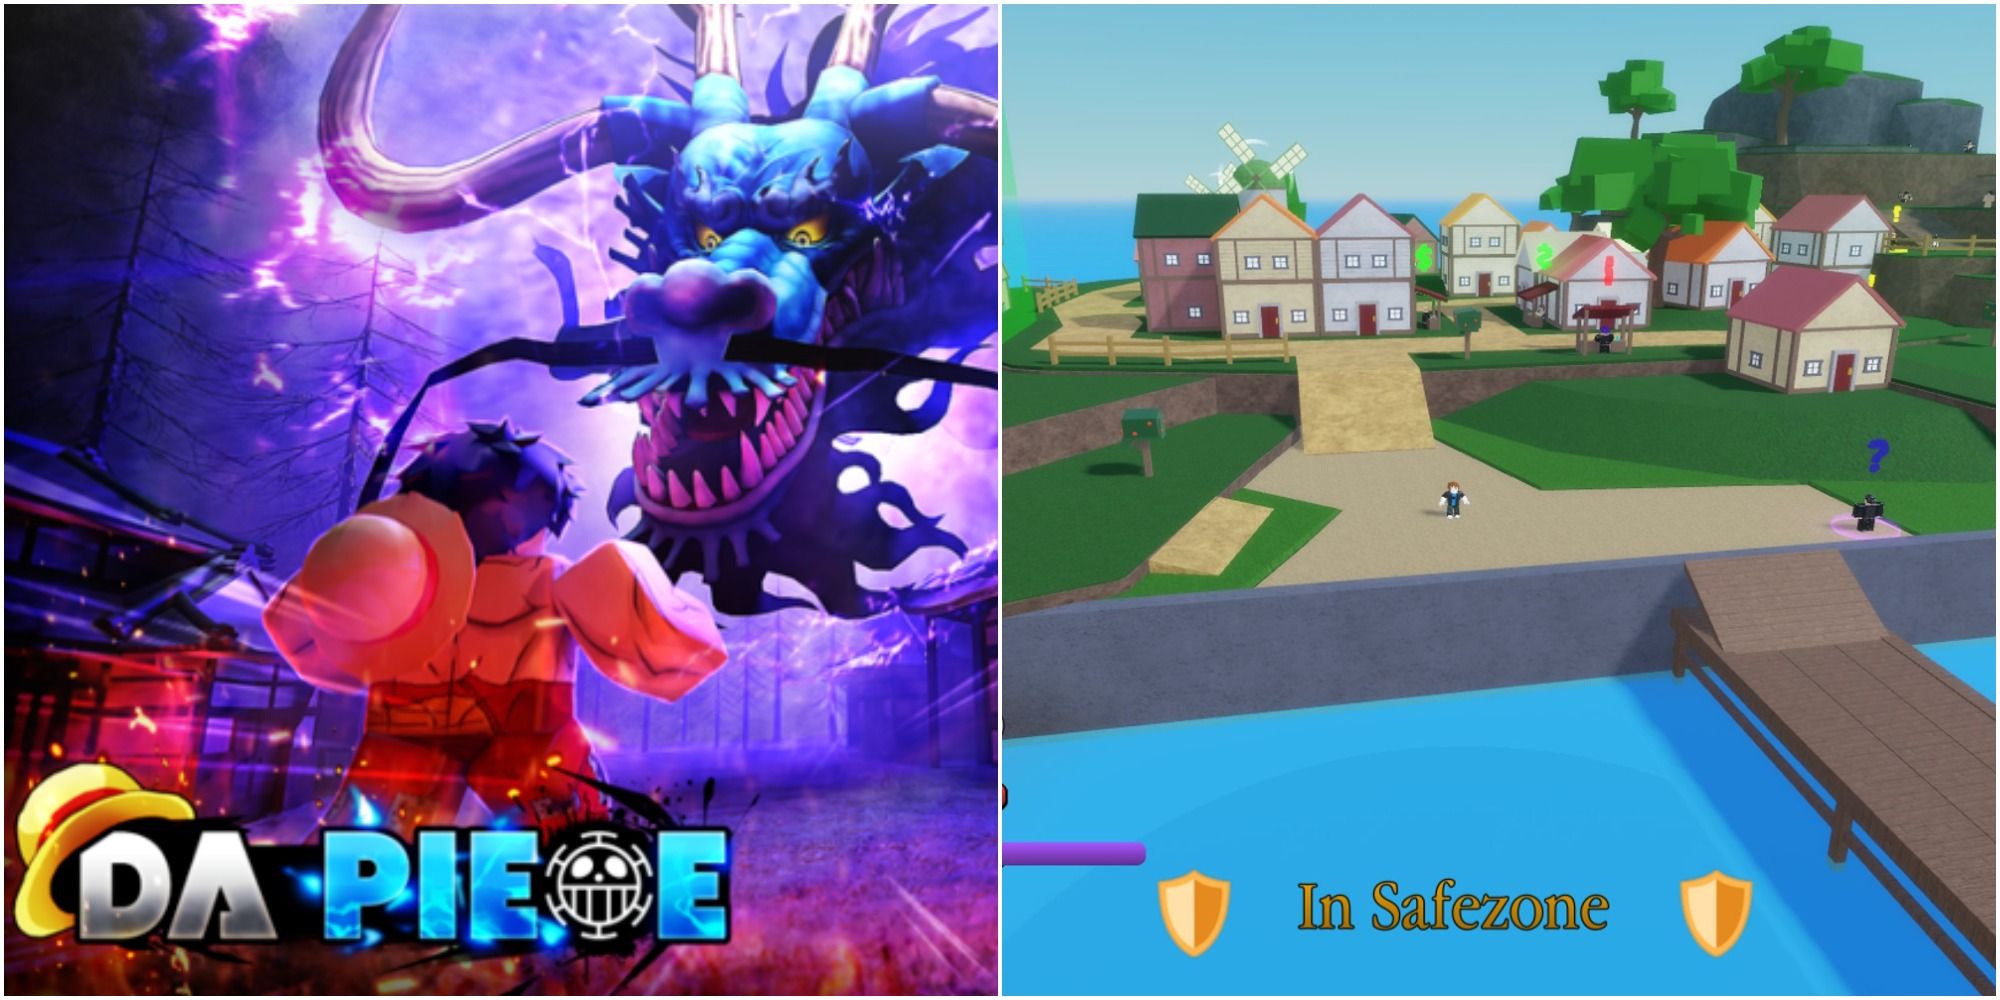 NEW* ALL WORKING CODES FOR A ONE PIECE GAME IN 2022! ROBLOX A ONE PIECE  GAME CODES 